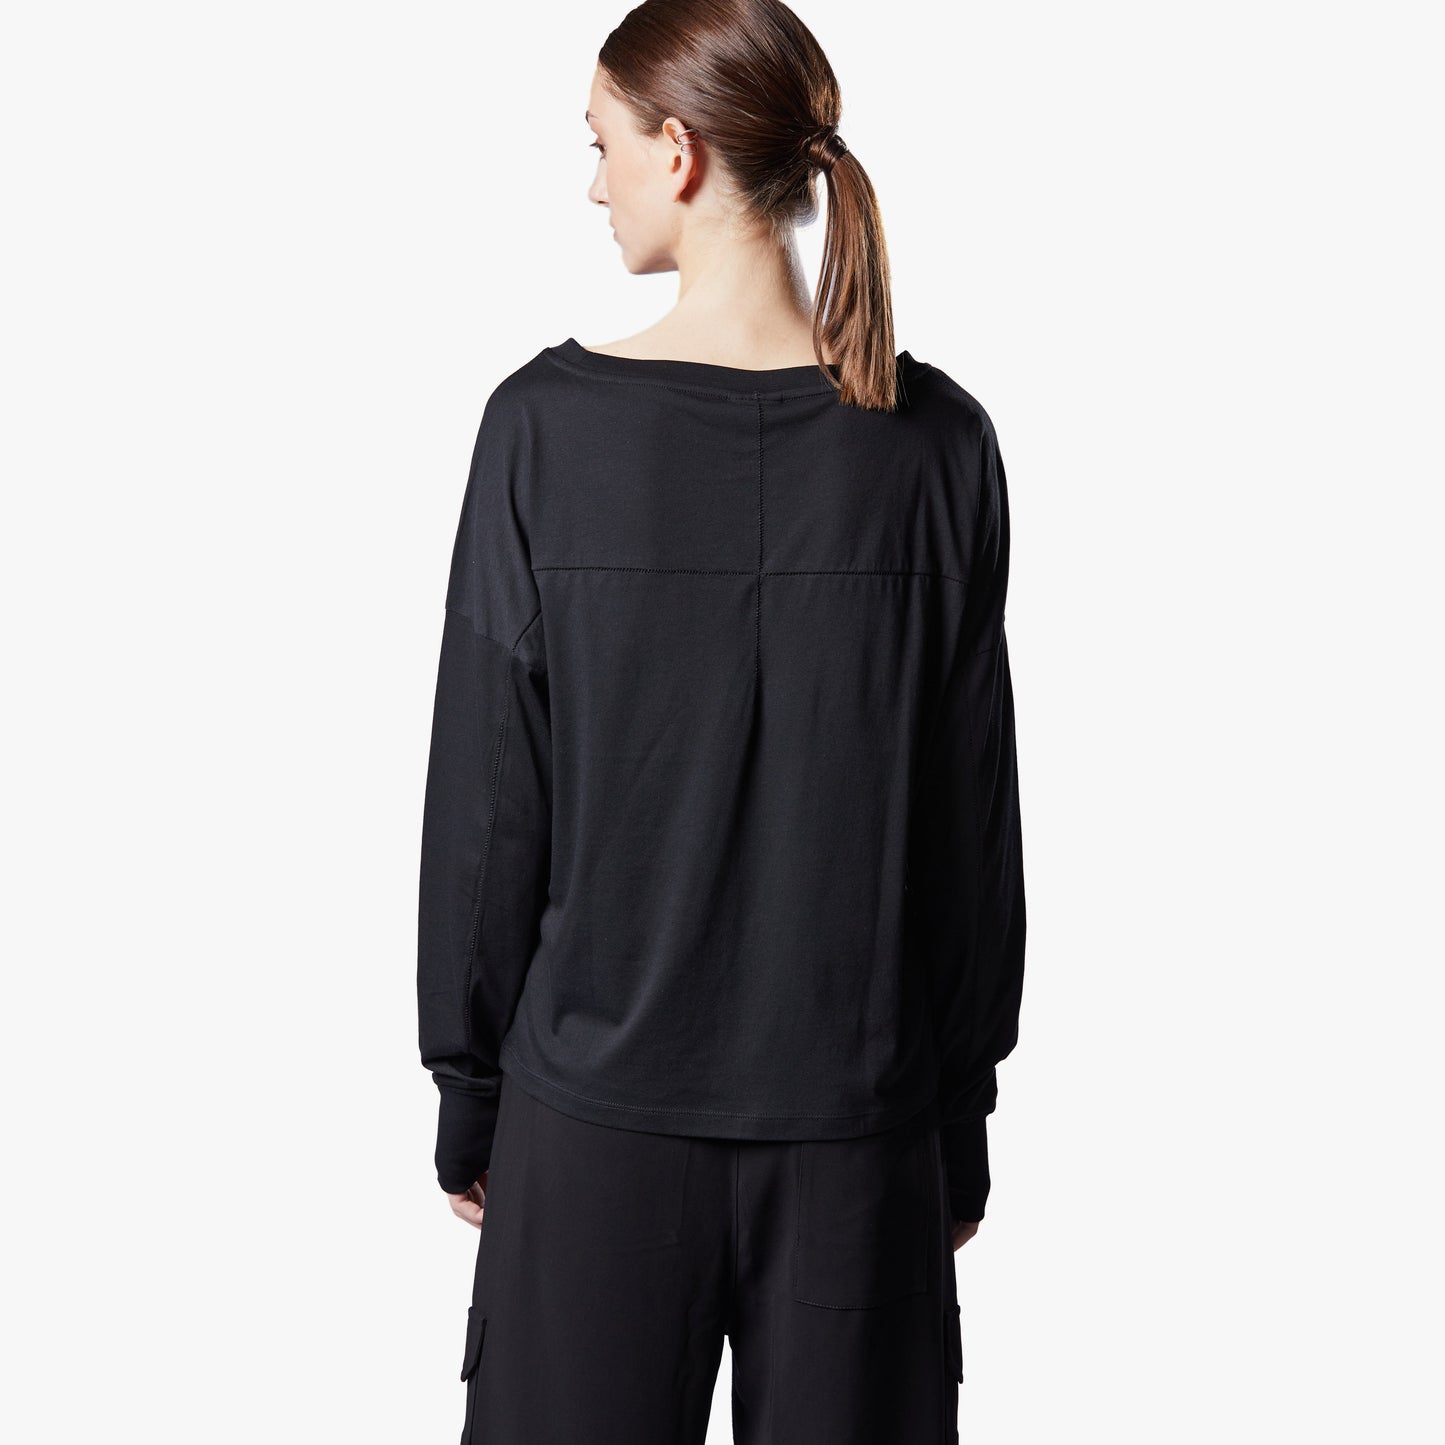 Long Sleeves with Thumbholes